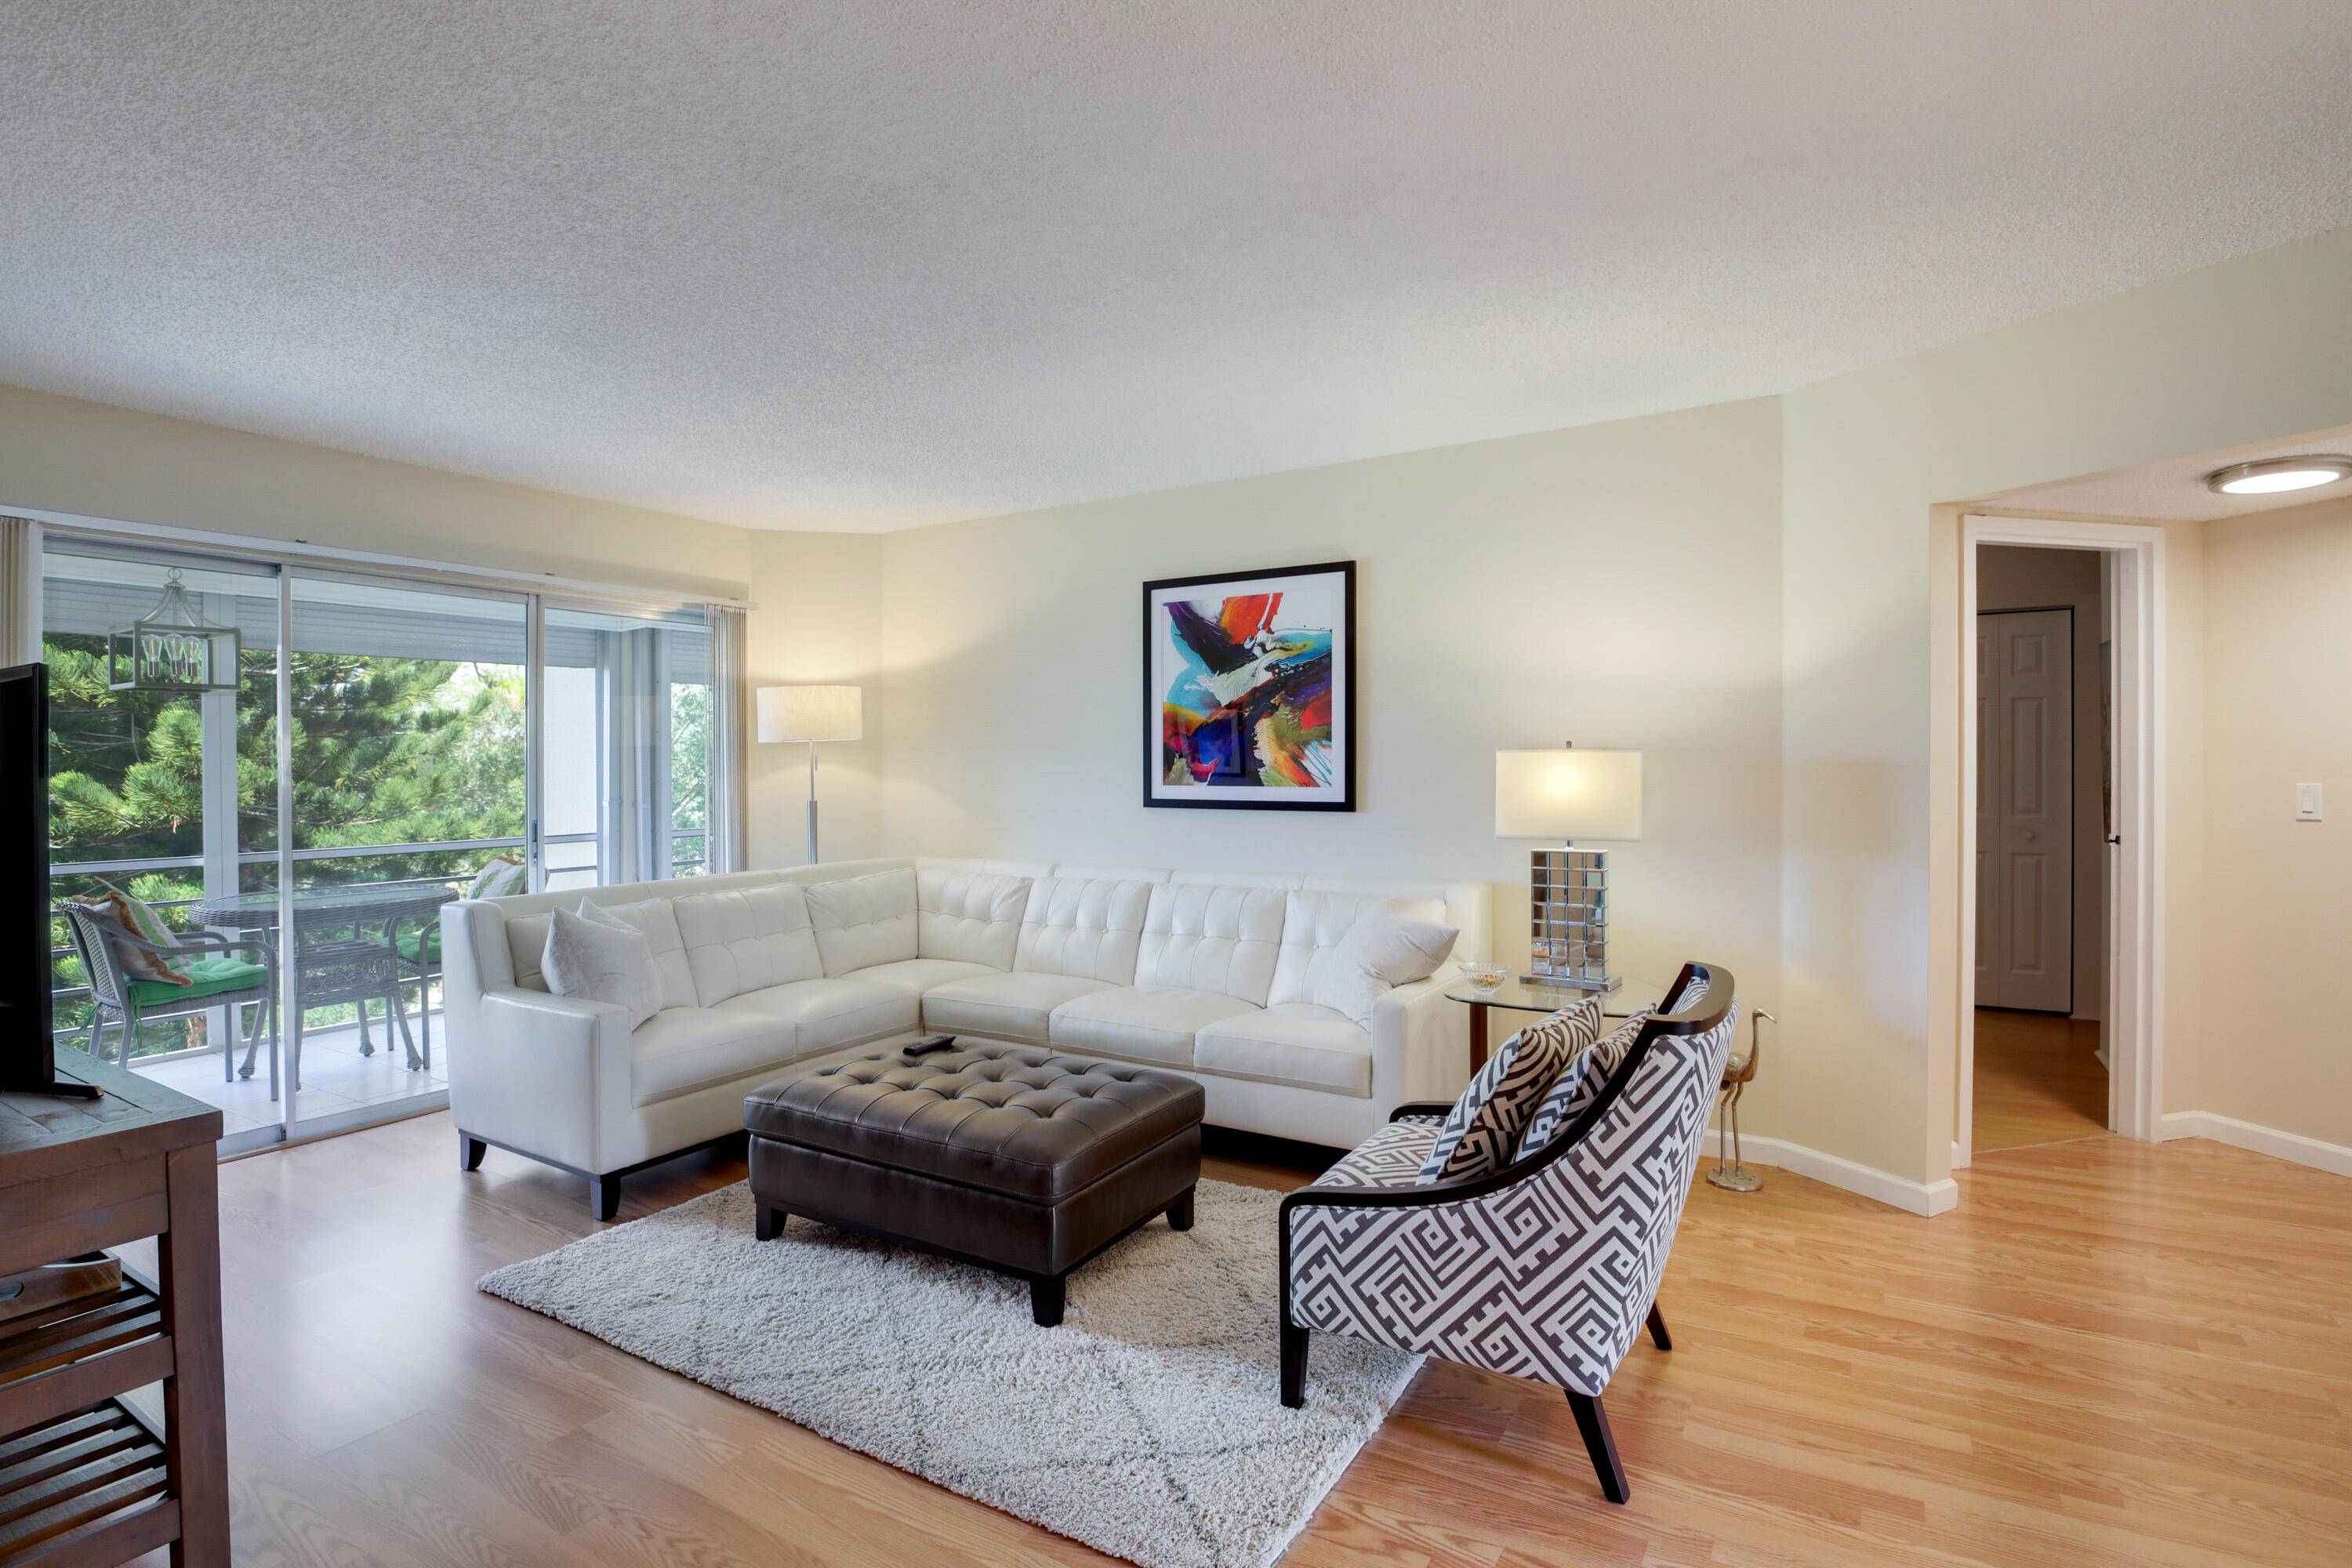 MOVE IN WONDERFUL ! ! EXCEPTIONAL, NATURALLY BRIGHT, SPARKLING, UPDATED CORNER CONDO AVAILABLE FULLY FURNISHED.